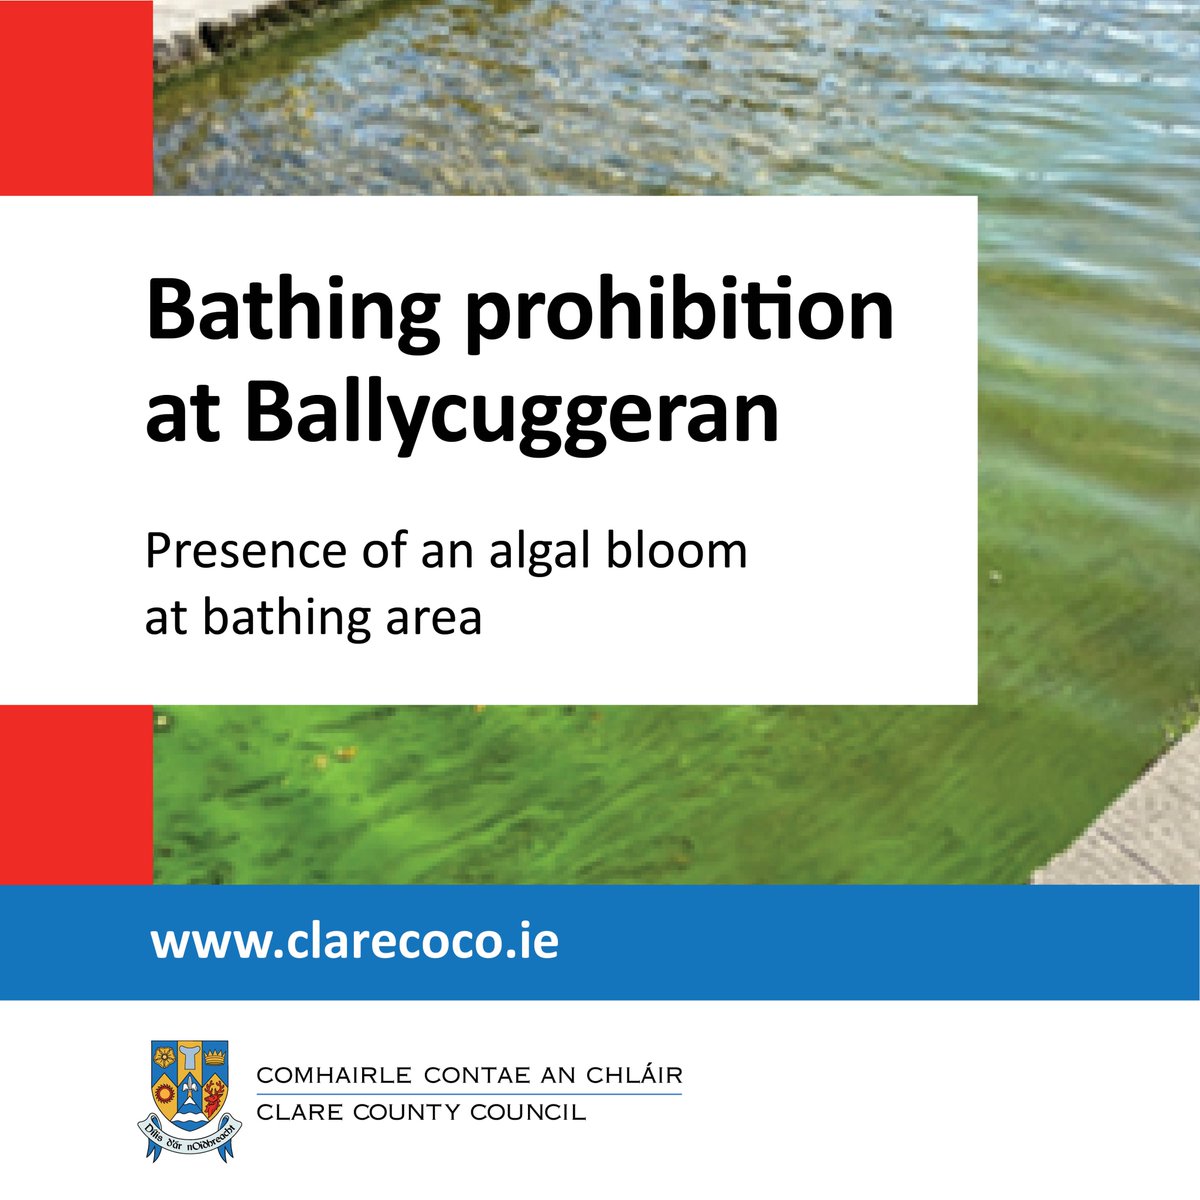 On the advice of the HSE, Clare County Council has today (2nd September, 2023) issued a bathing prohibition at the Ballycuggeran bathing area on Lough Derg. The red flag will be flying at this location until further notice.